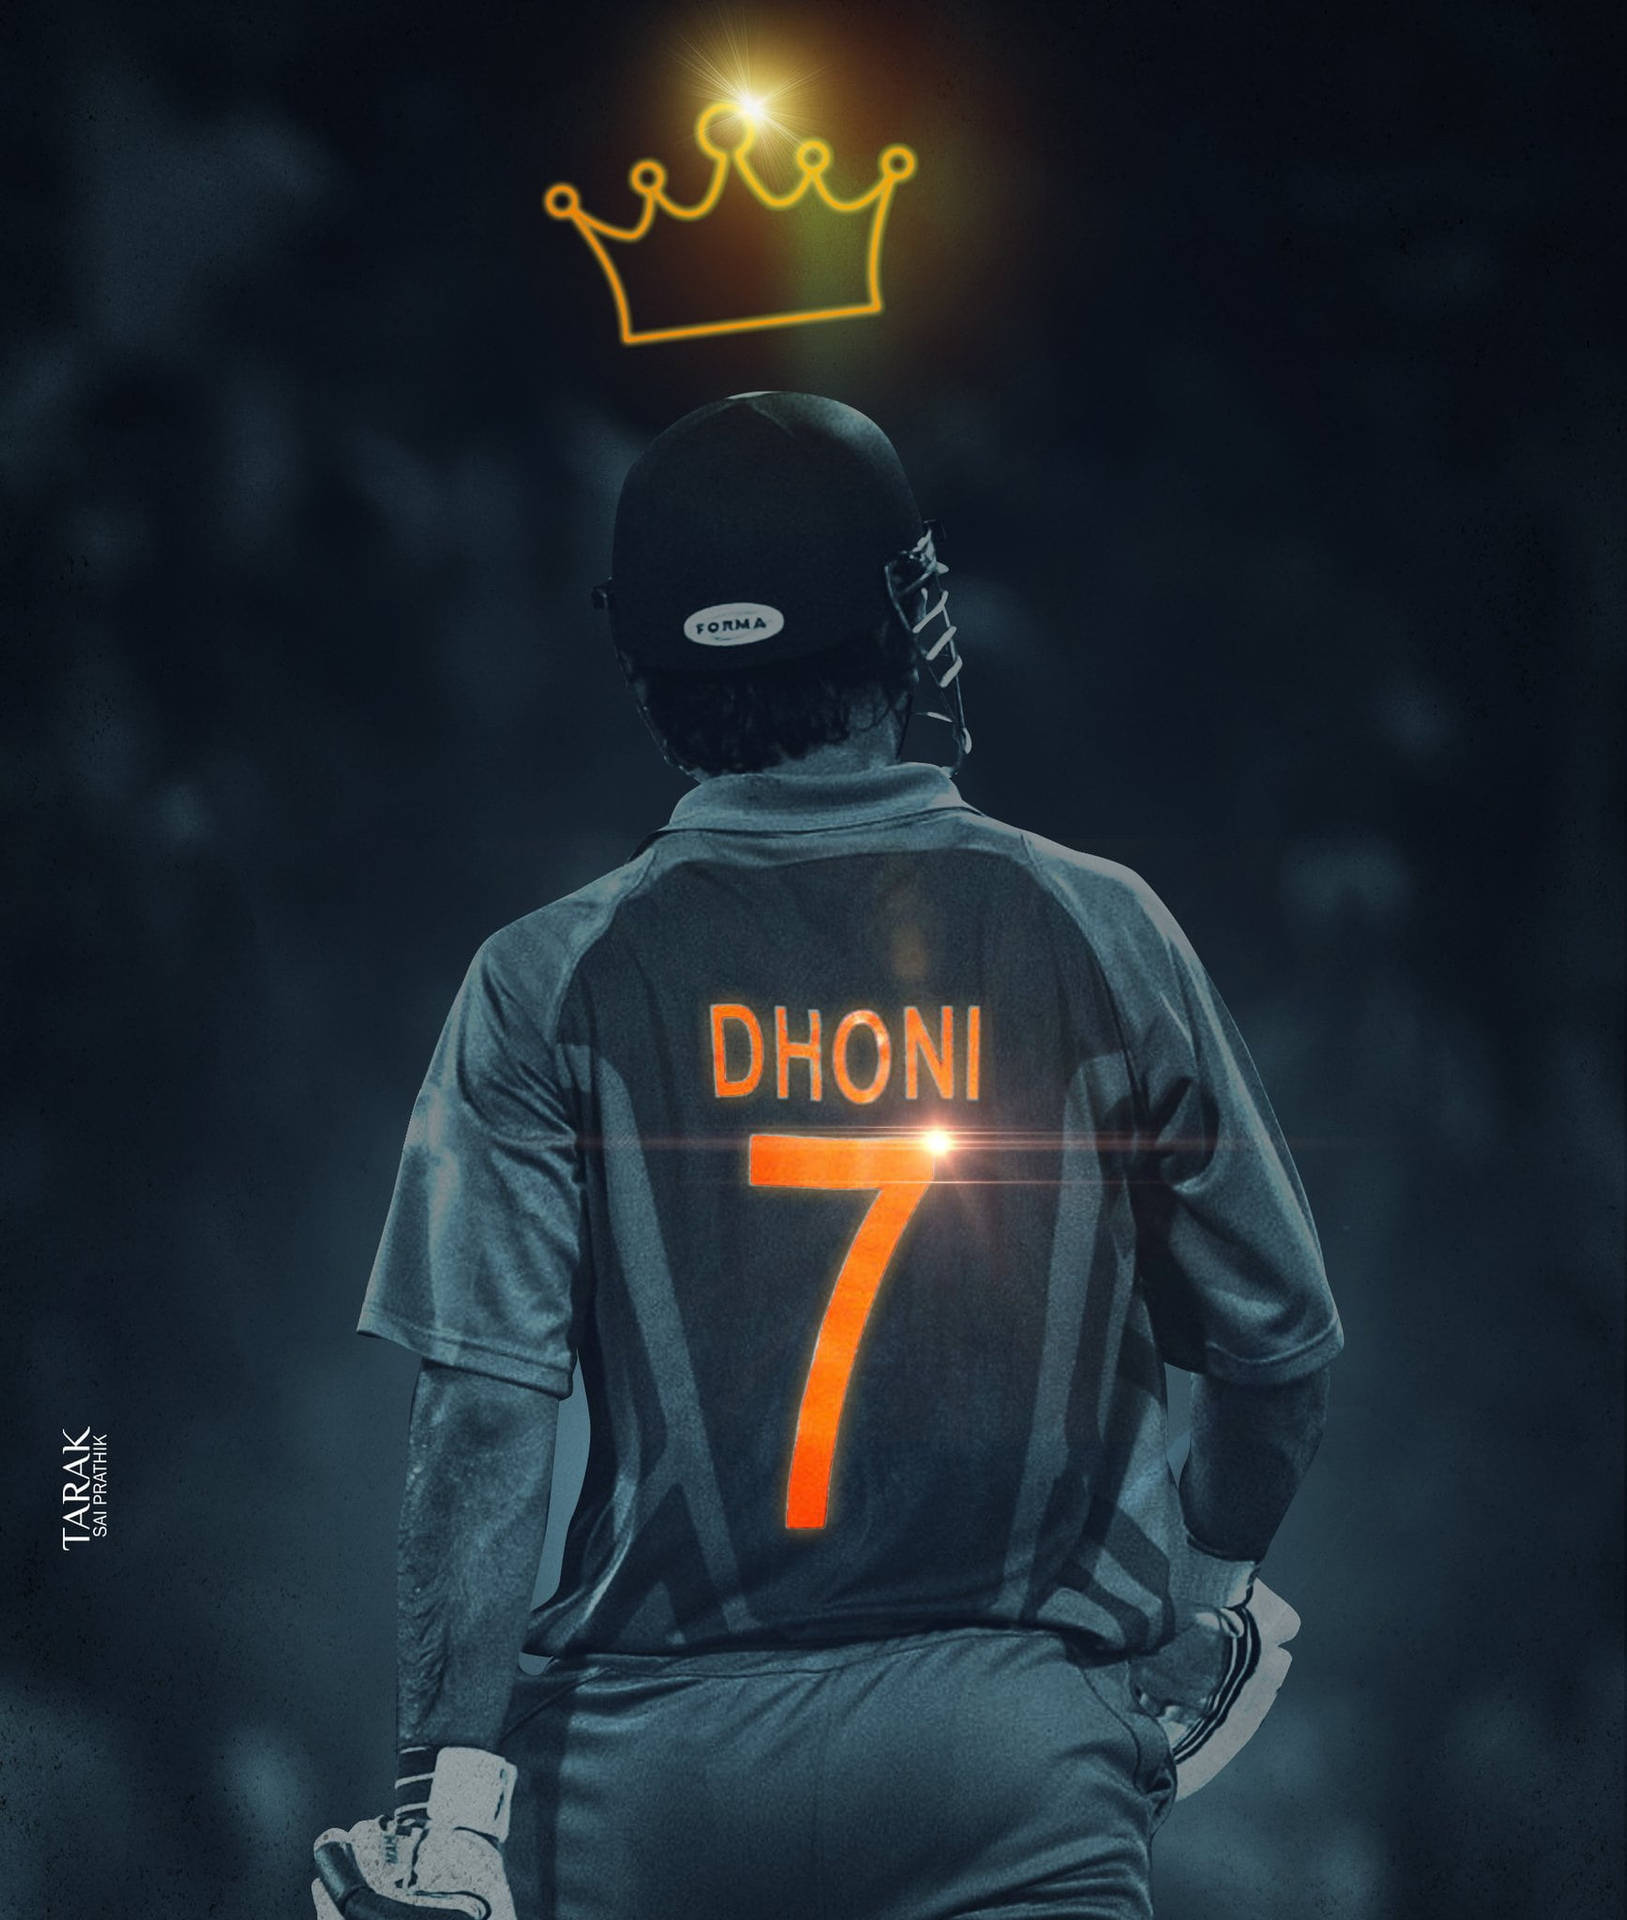 Msd Glowing Crown Background